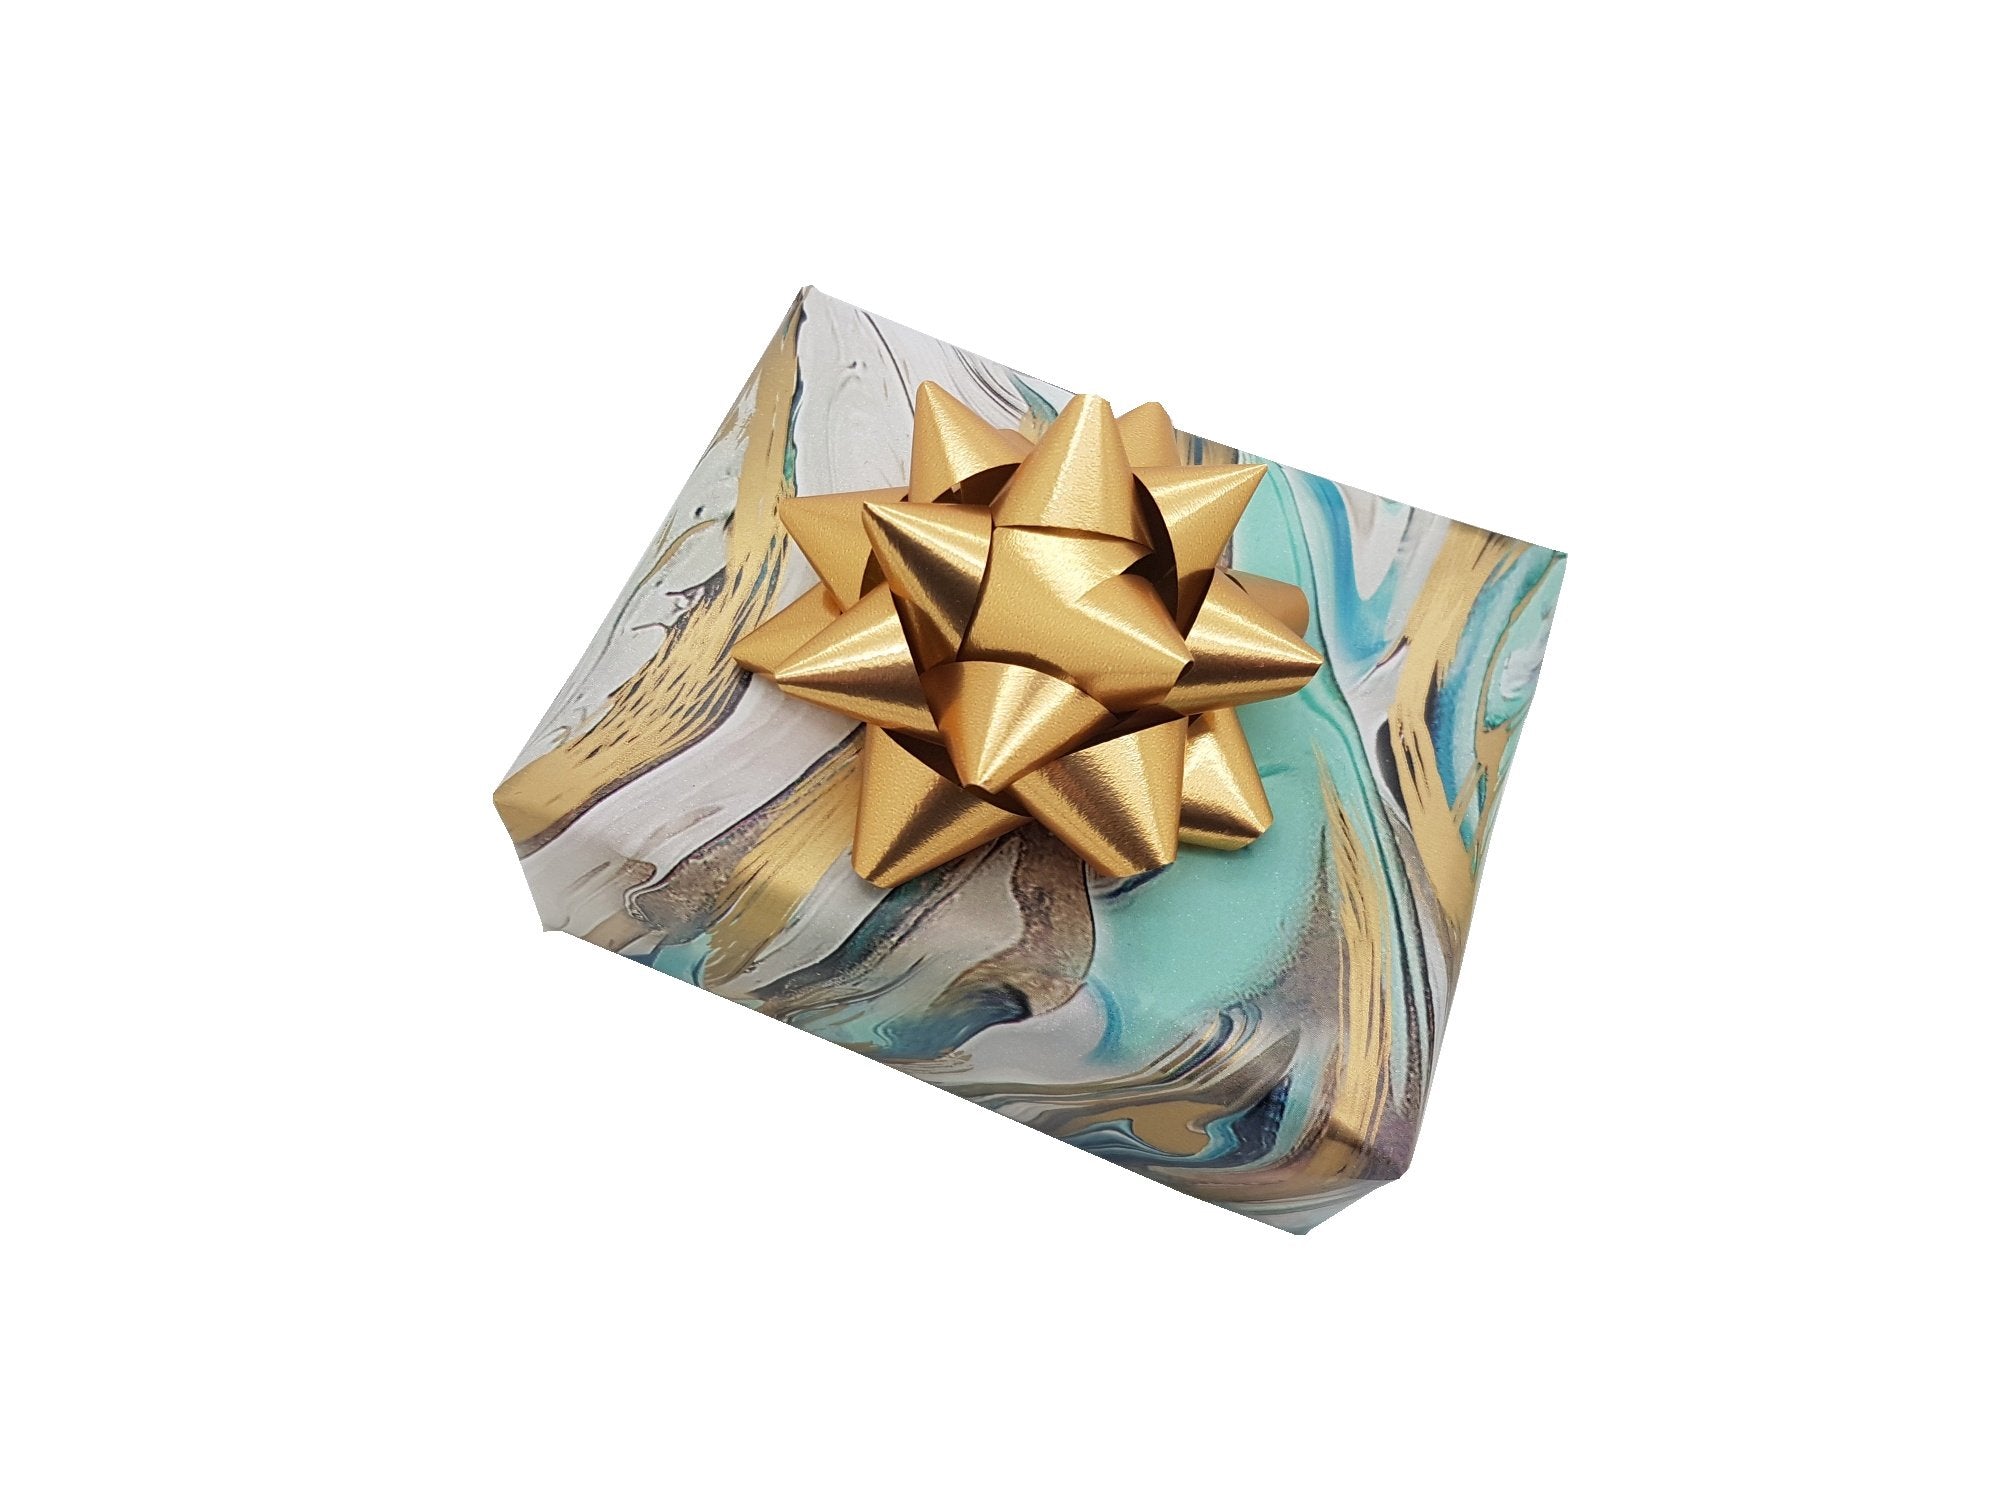 Aqua Teal Gold Marbled Wrapping Paper